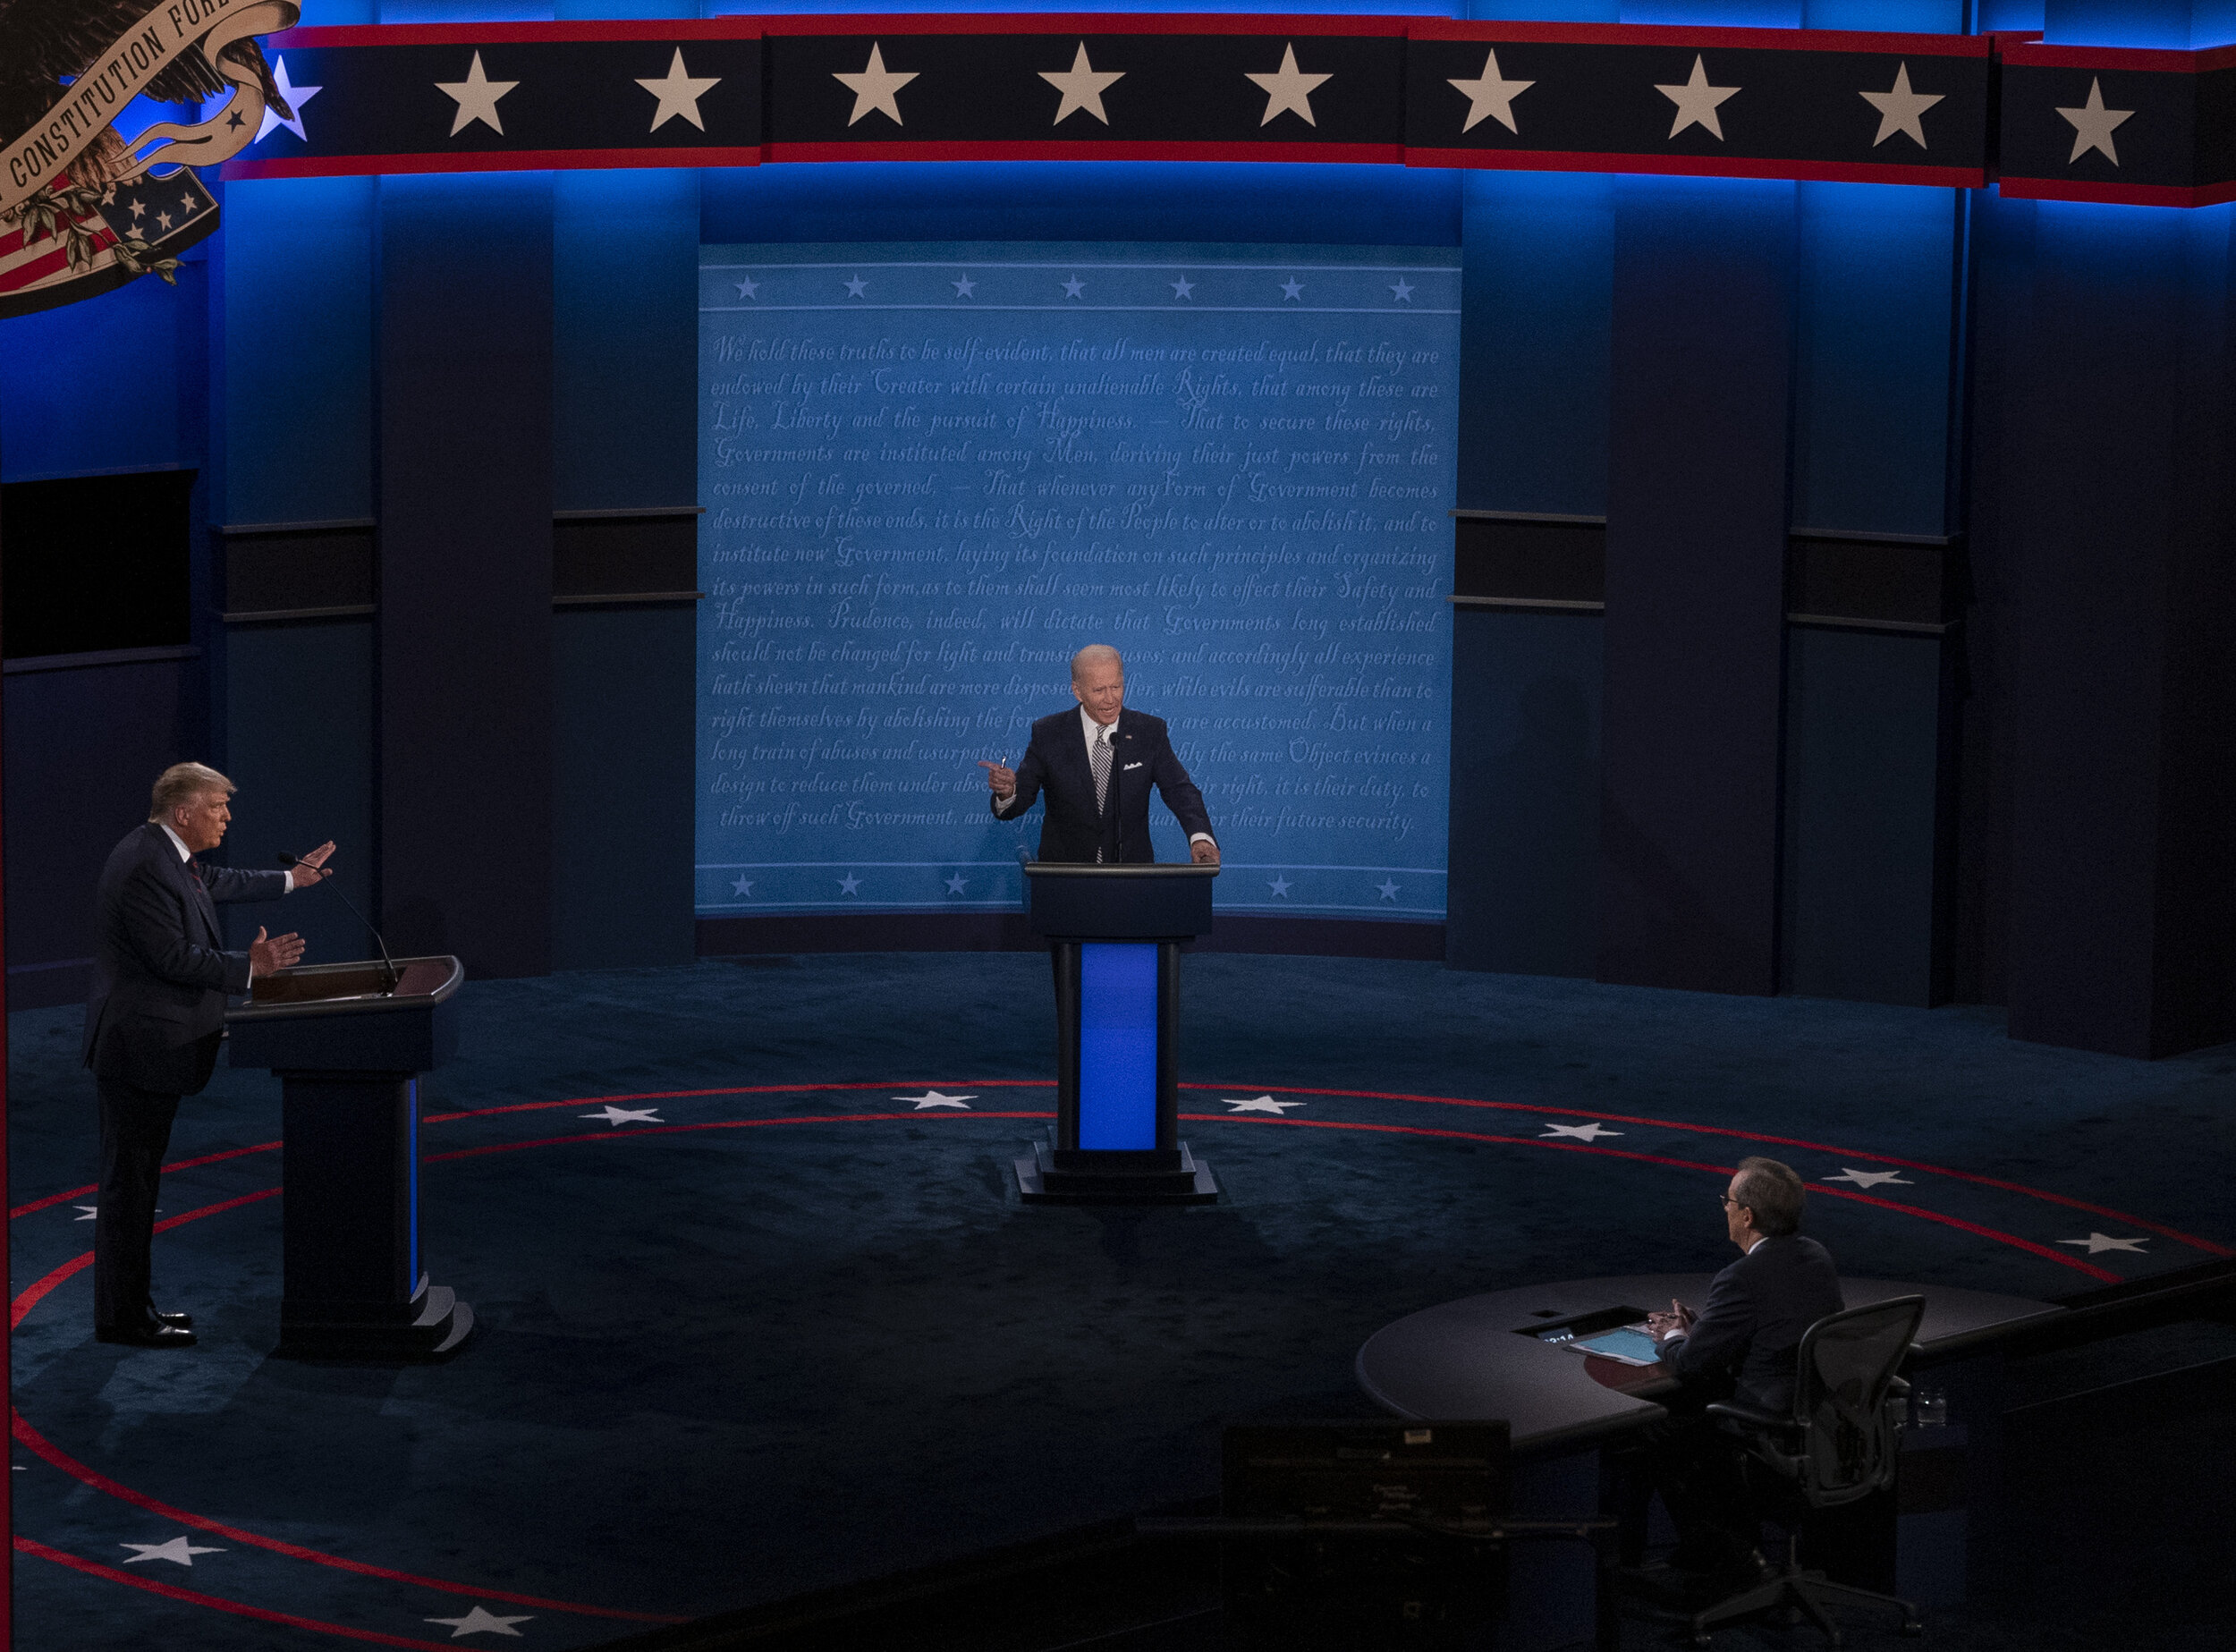  President Donald Trump and former Vice President Joe Biden argue and talk over each other during the first presidential debate held at Case Western University in Cleveland, Ohio on September 29, 2020. 